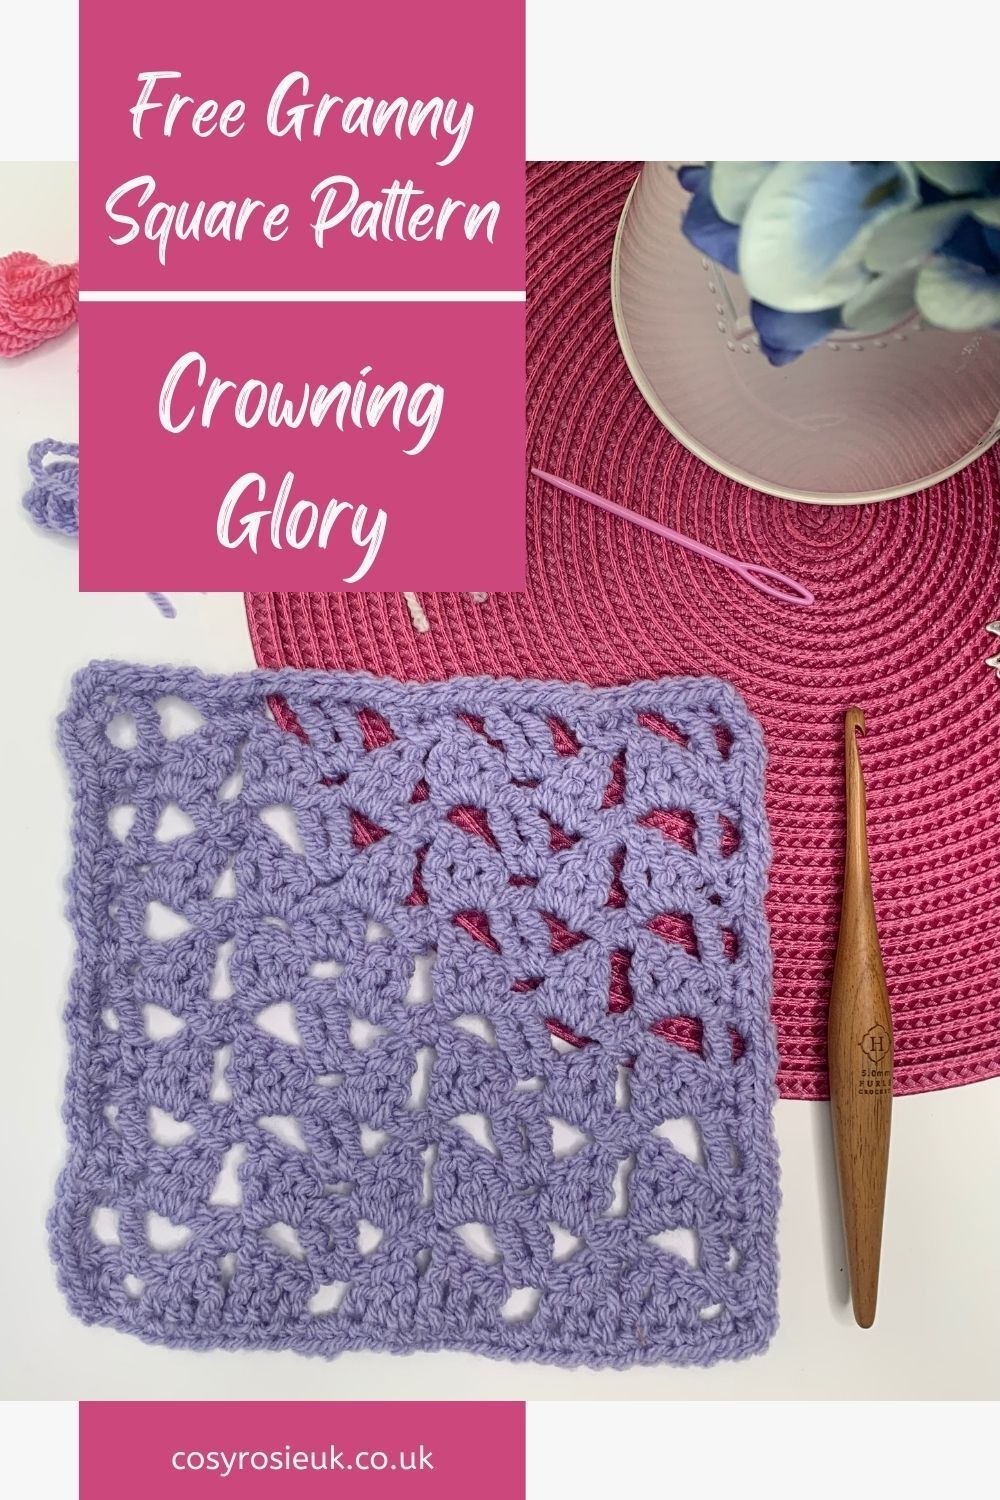 Crowning Glory Granny Square pattern